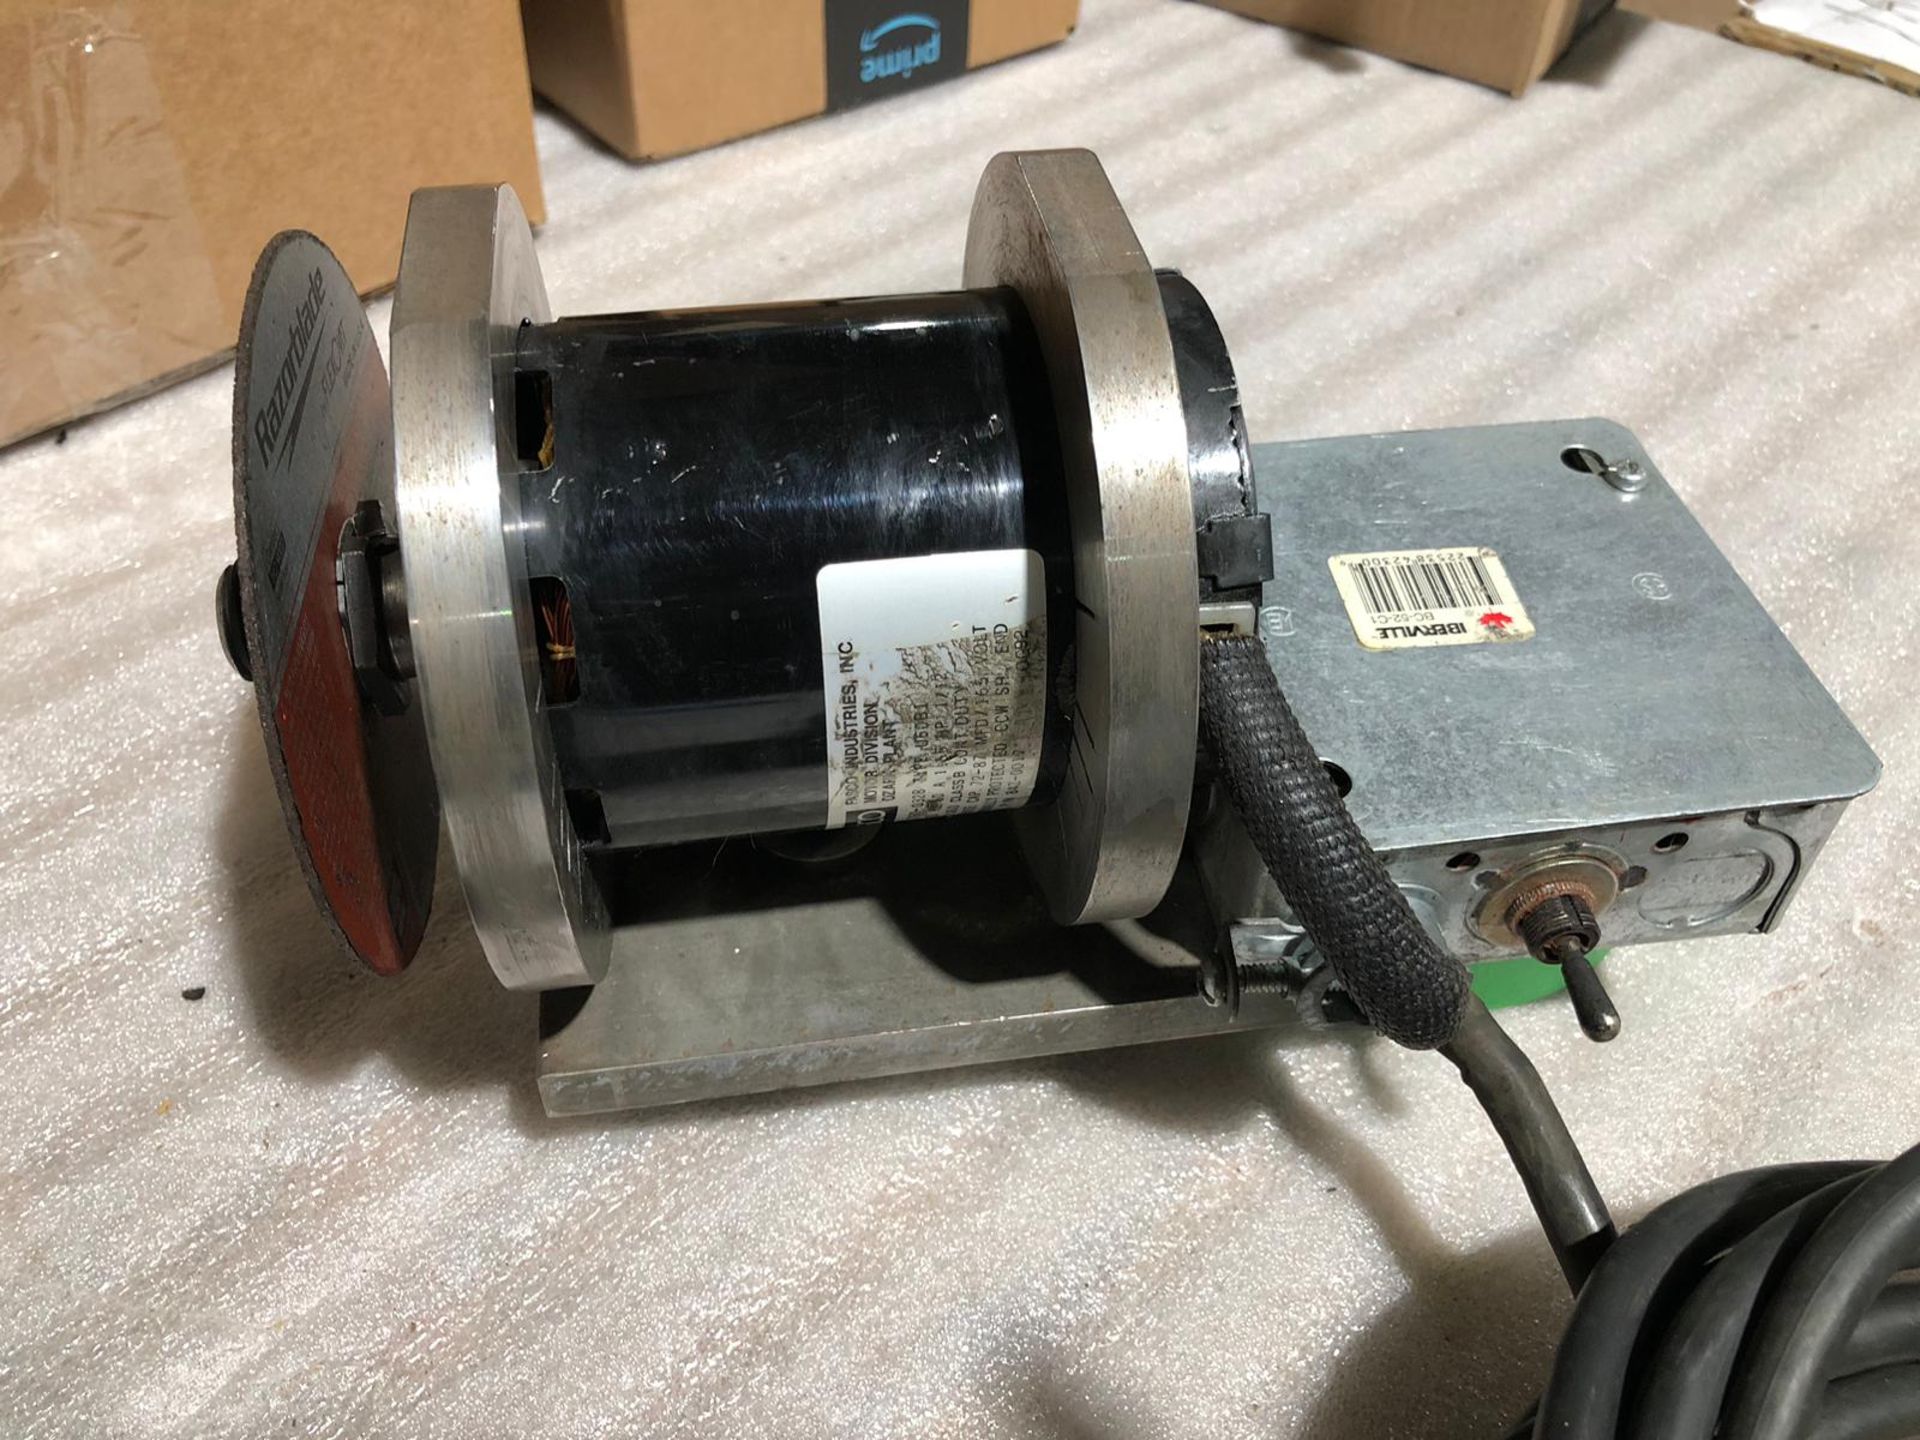 Fasco Cutting Disc Unit with 3200RPM single phase motor